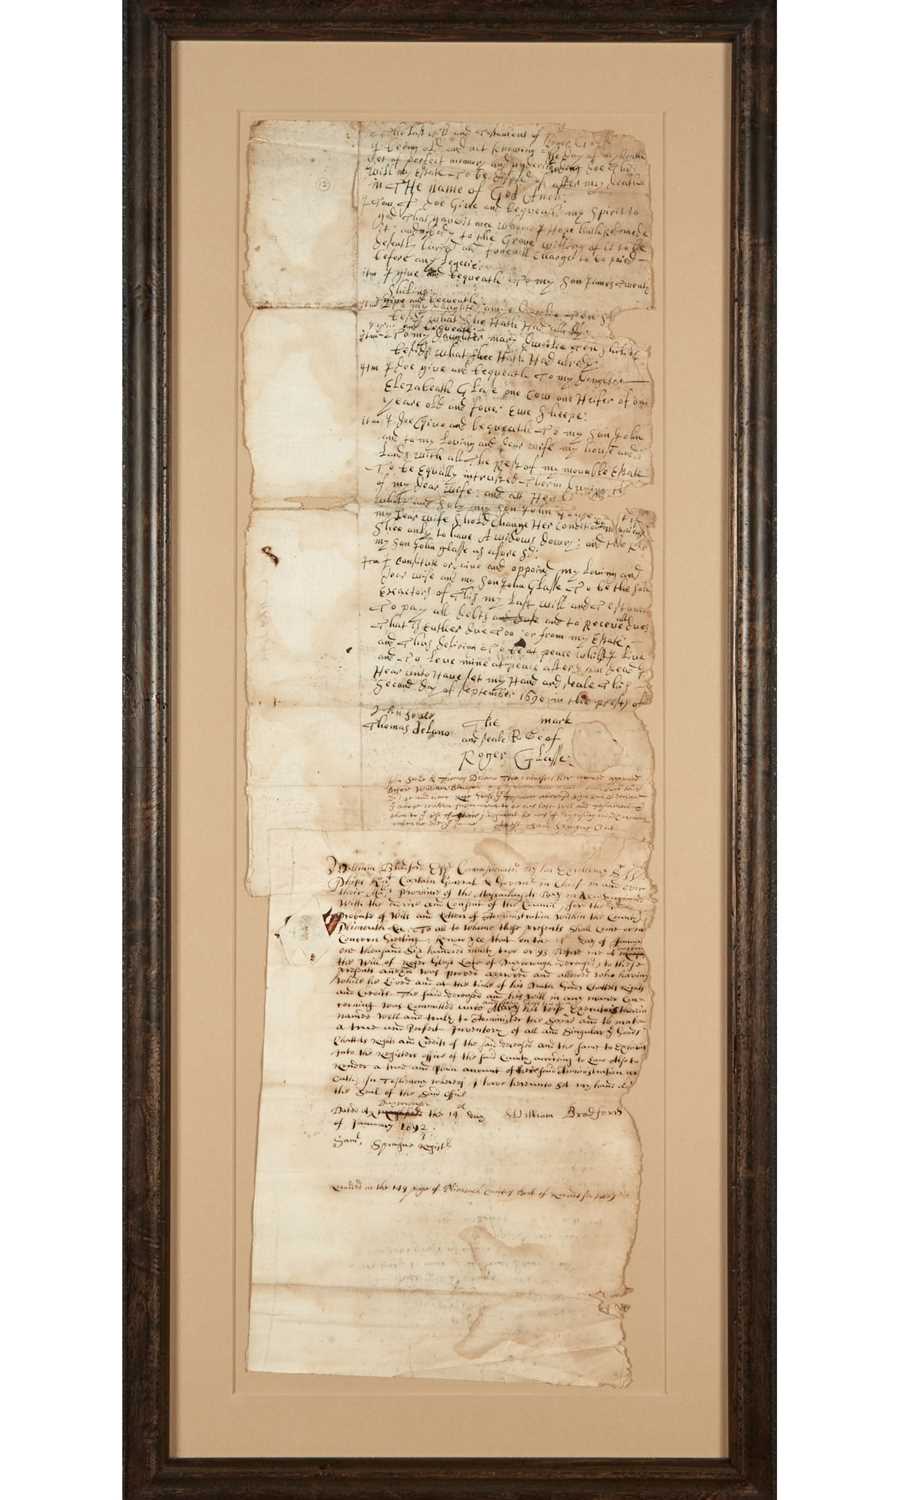 Lot 36 - Document signed by William Bradford the Younger